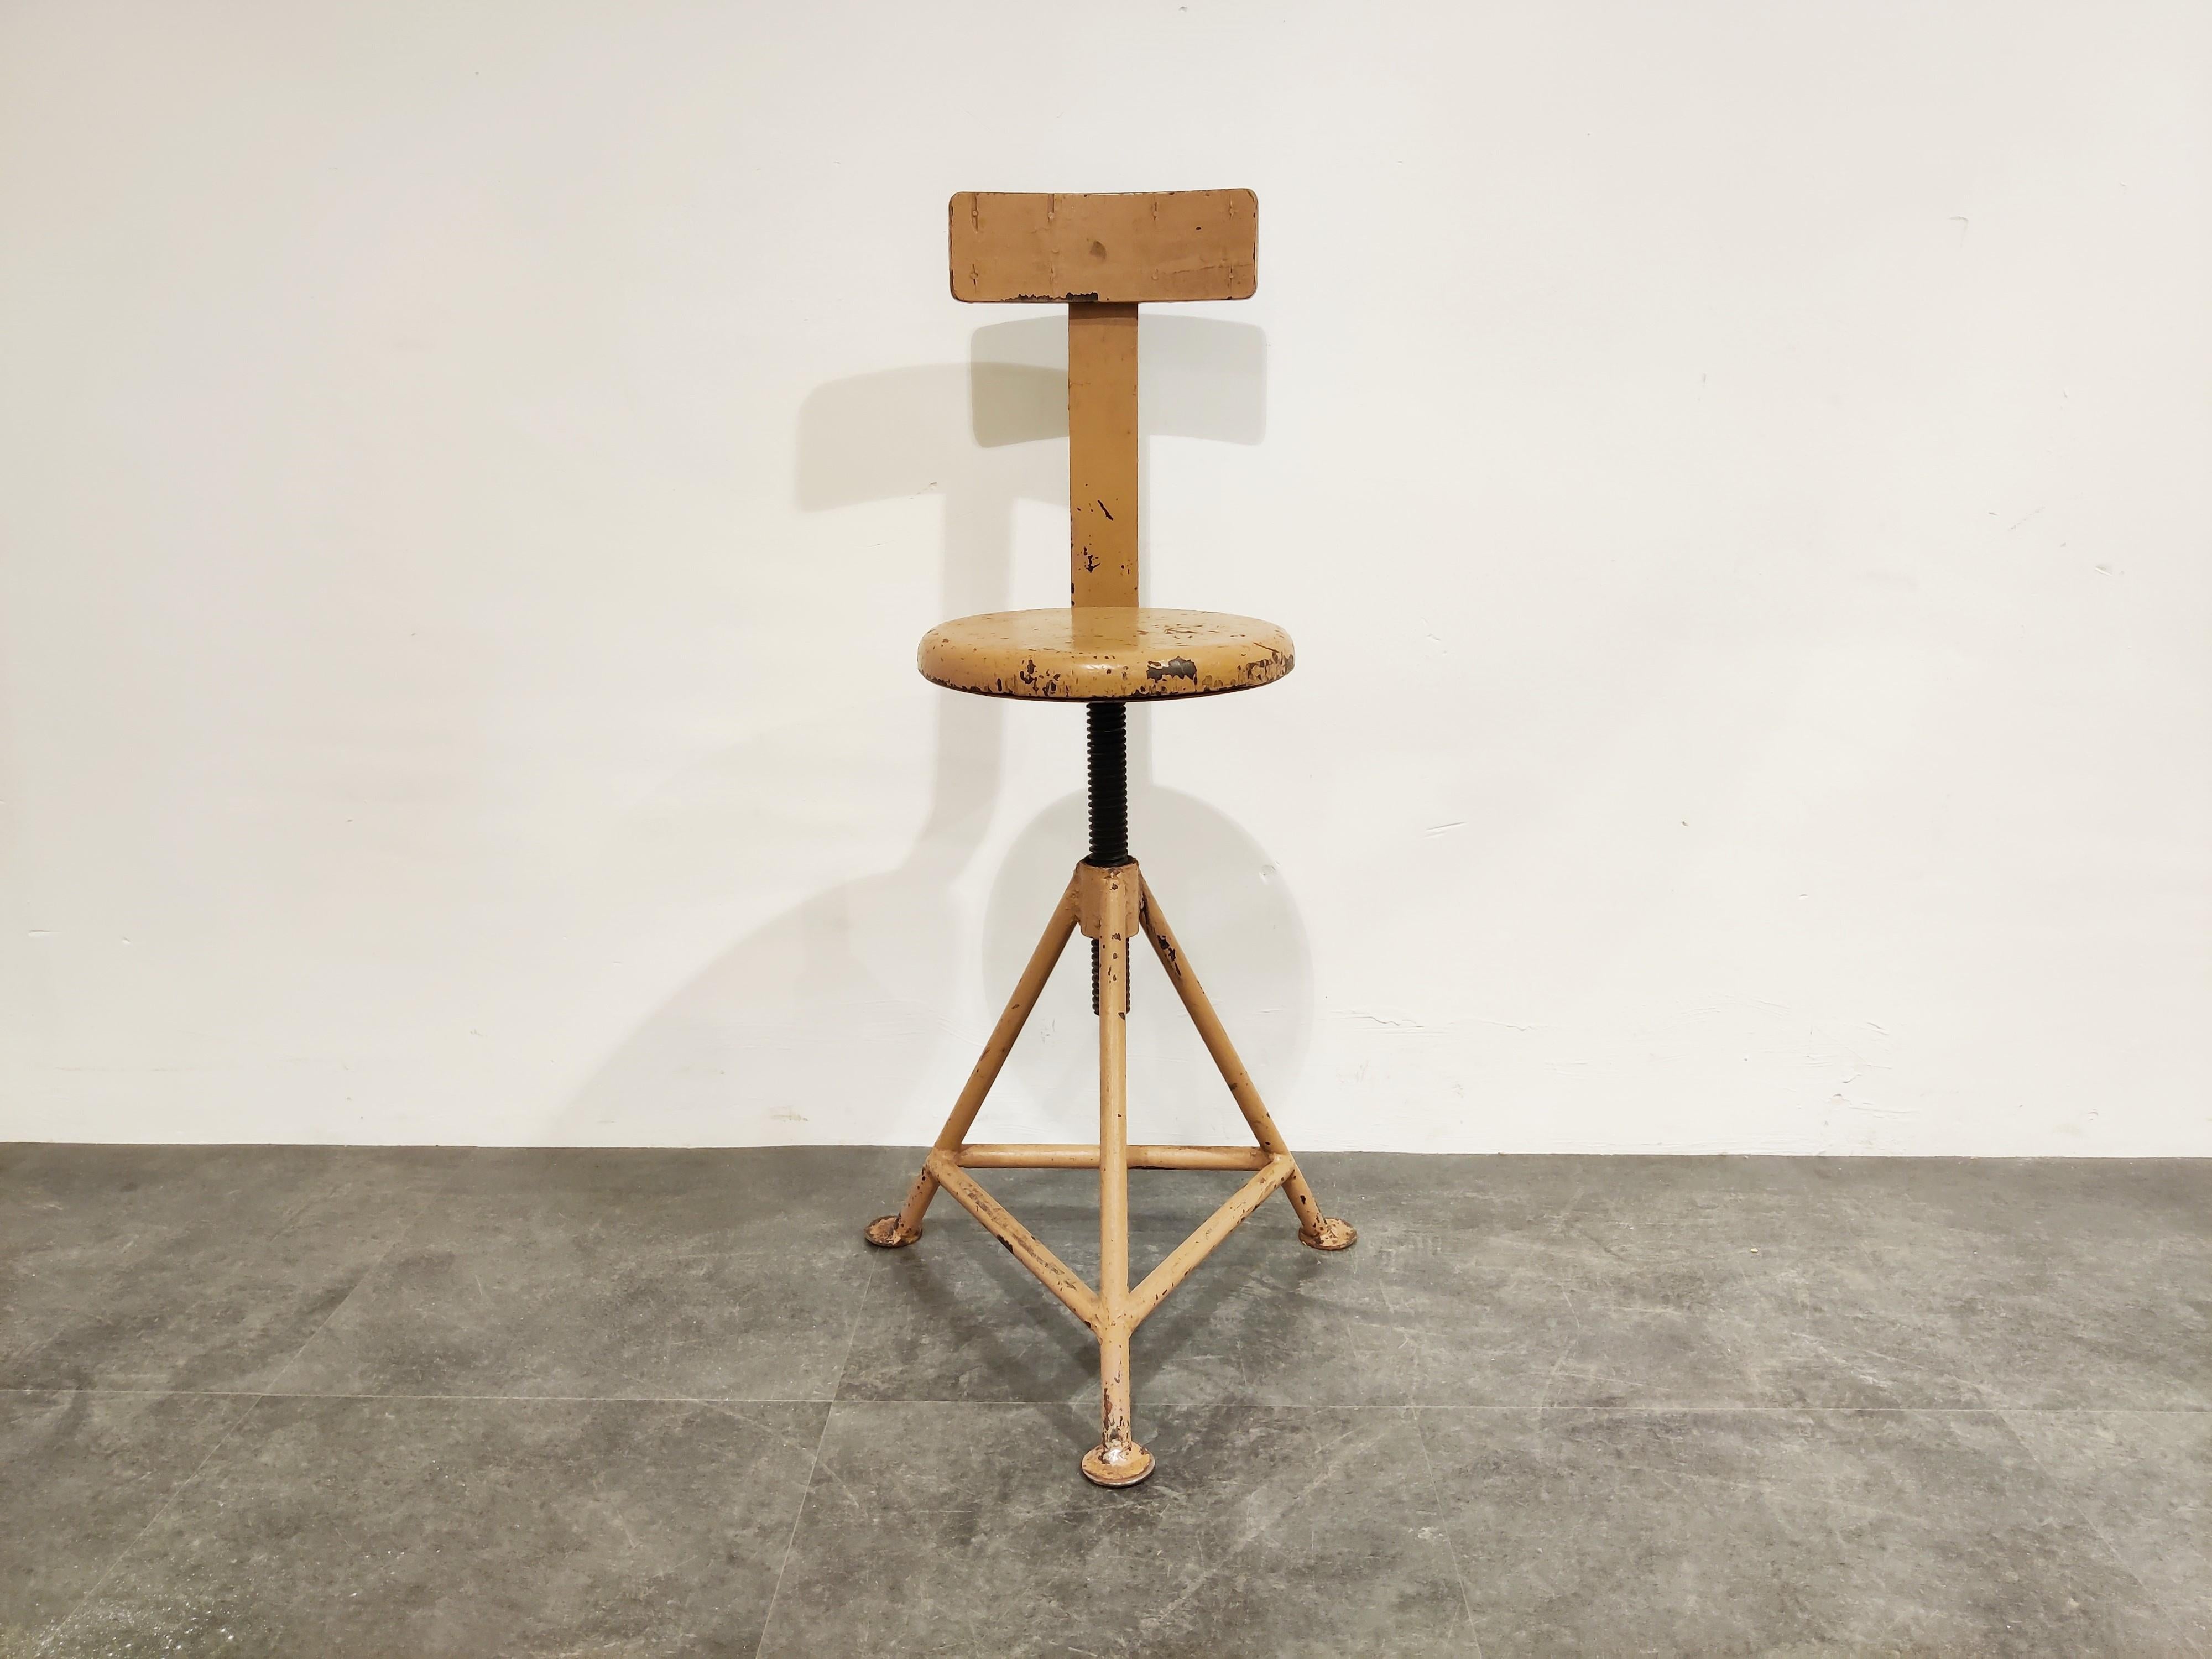 Great looking vintage tripod base factory stool with a backrest.

The seat height is adjustable by turning the seat. 

Good original condition.

1950s, Latvia

Dimensions:
Max height 100cm/39.37